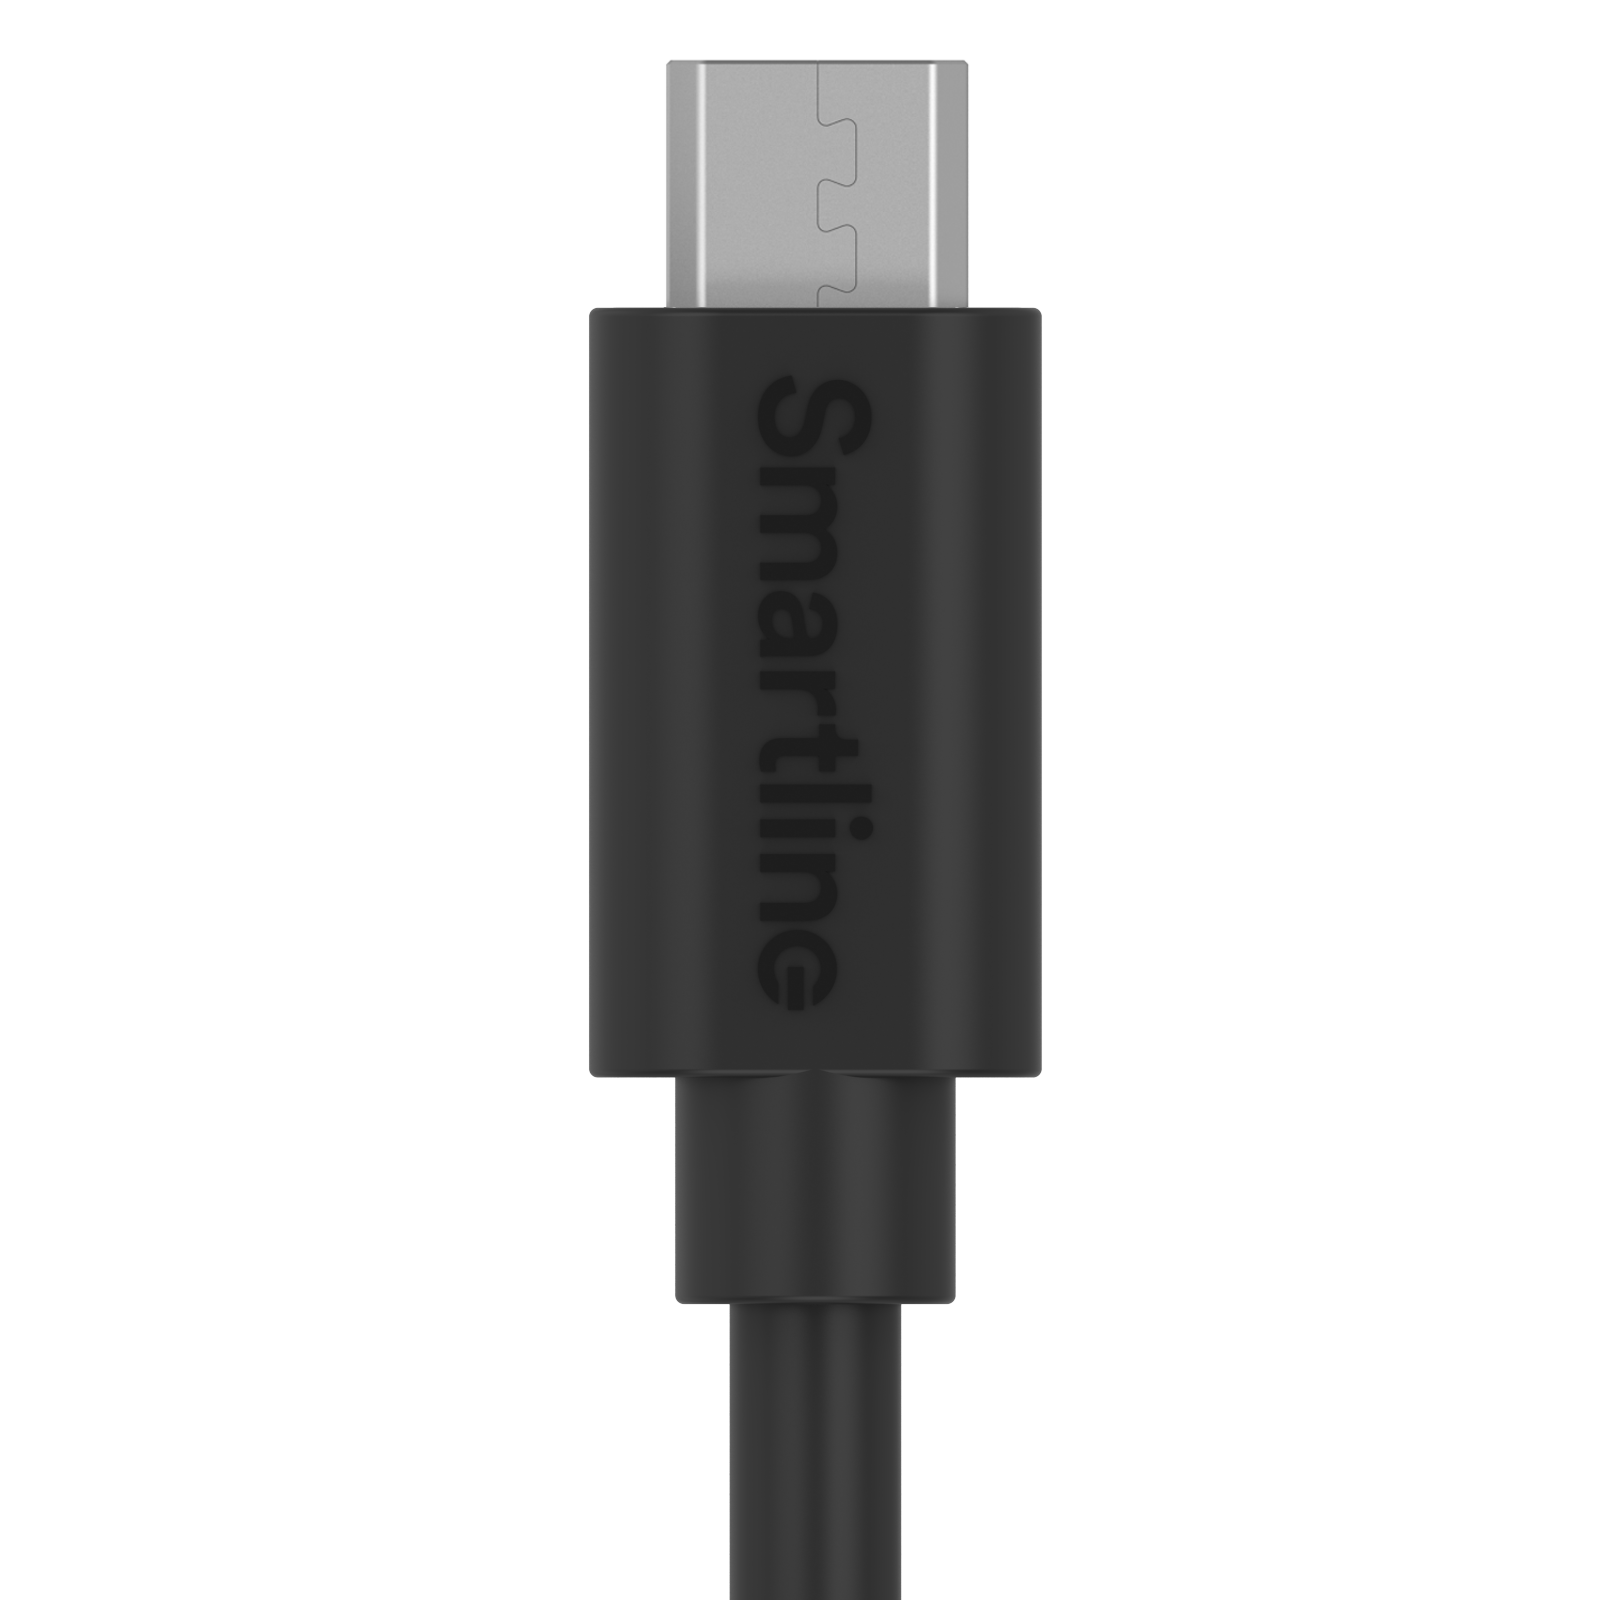 Cable USB-A a MicroUSB 1 metro Negro